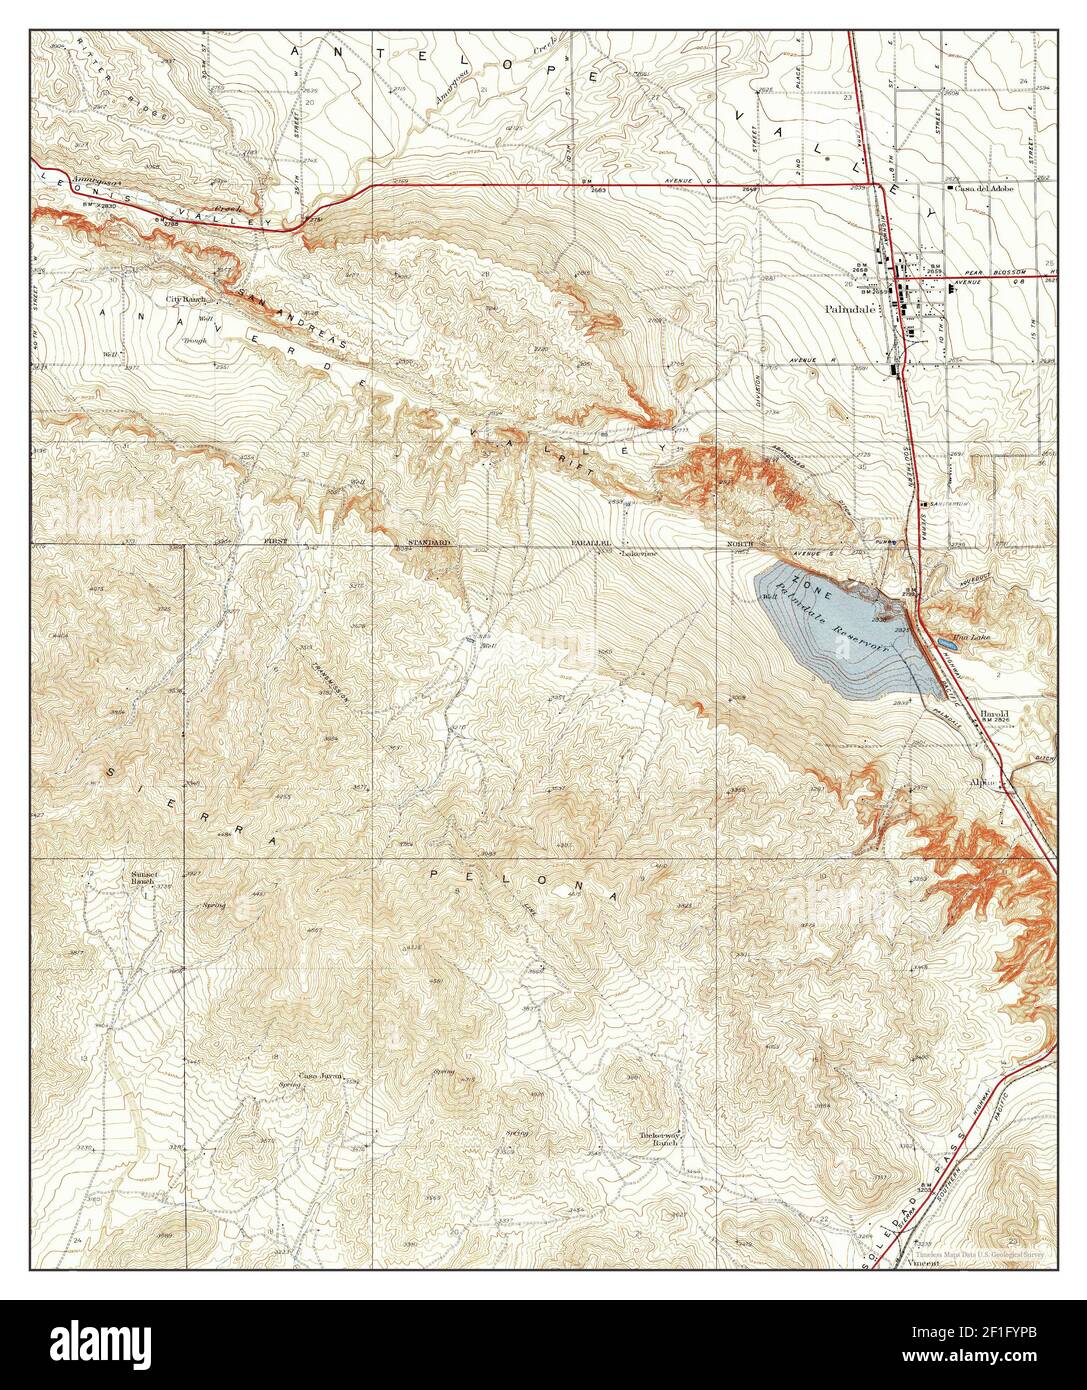 Palmdale, California, map 1937, 1:24000, United States of America by Timeless Maps, data U.S. Geological Survey Stock Photo